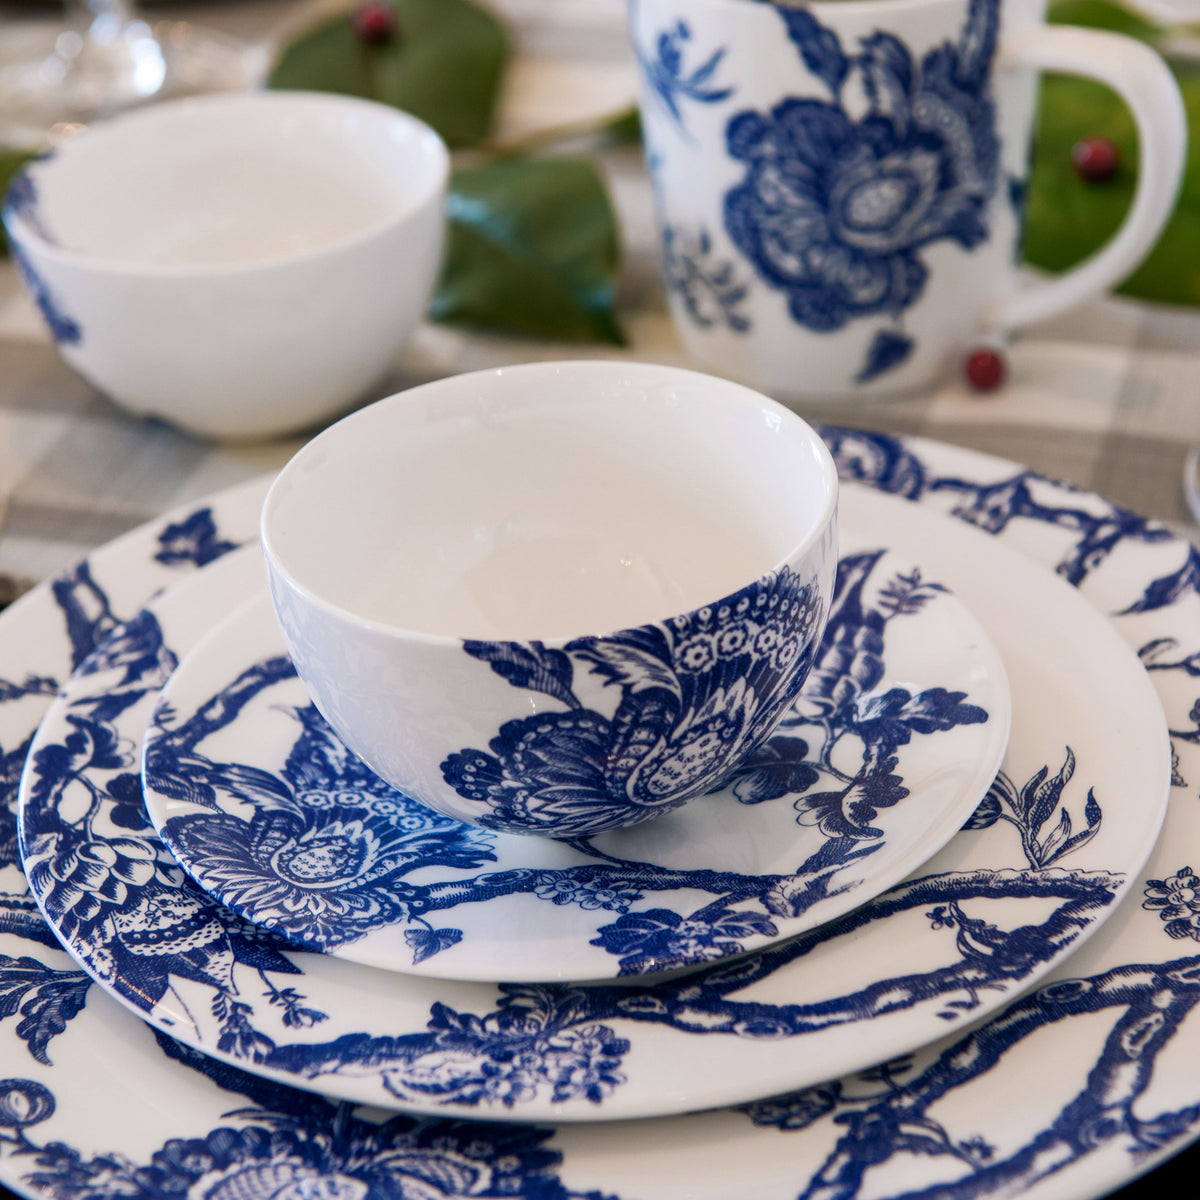 A set of Caskata Artisanal Home Arcadia Rimmed Salad Plates featuring intricate blue floral patterns, including plates, bowls, and a mug, beautifully arranged on a table with a checkered tablecloth.